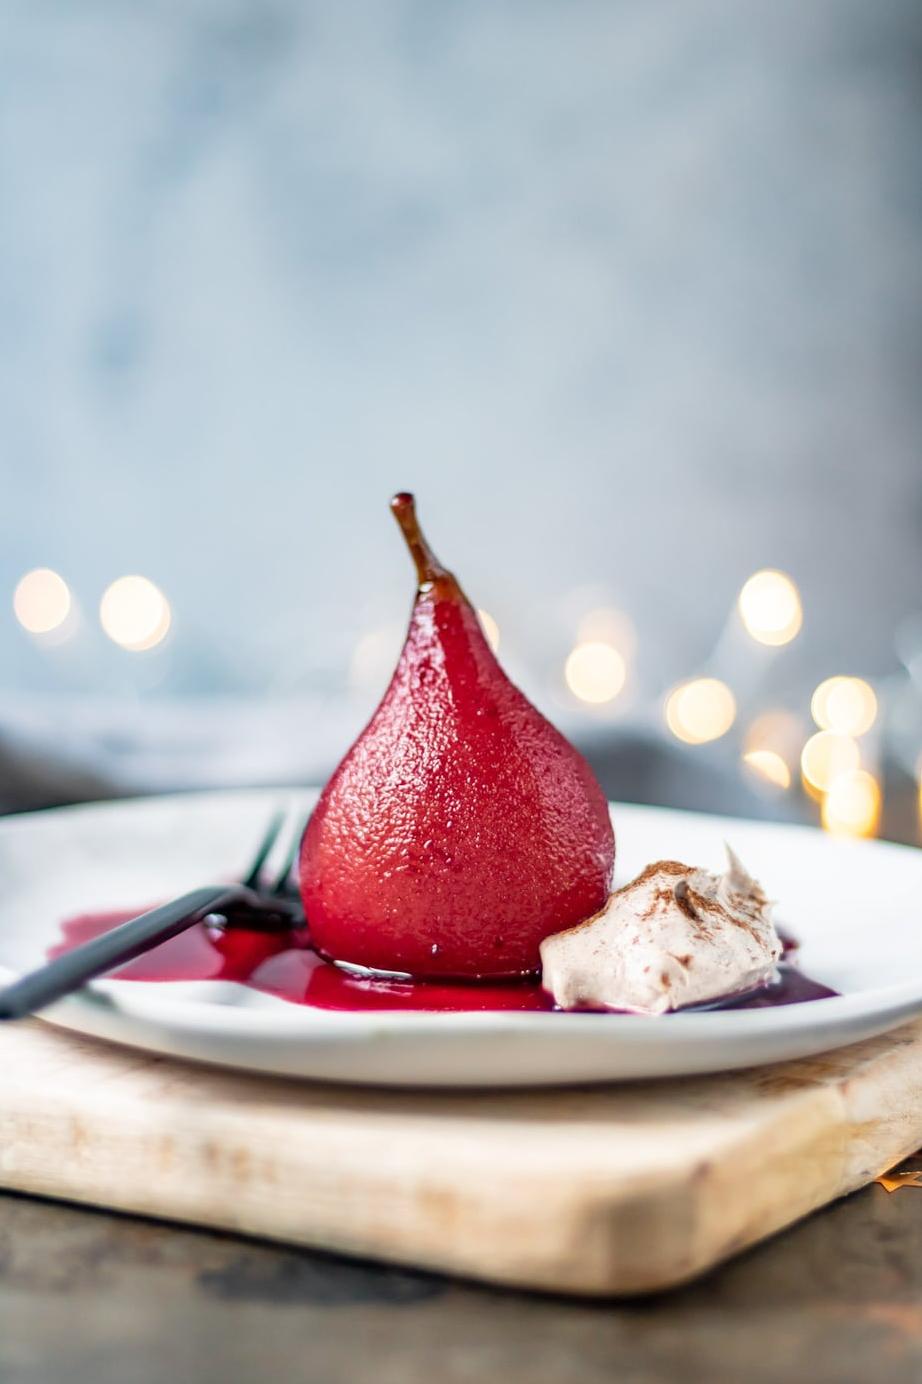  Transform ordinary pears into a luxurious dessert with red wine